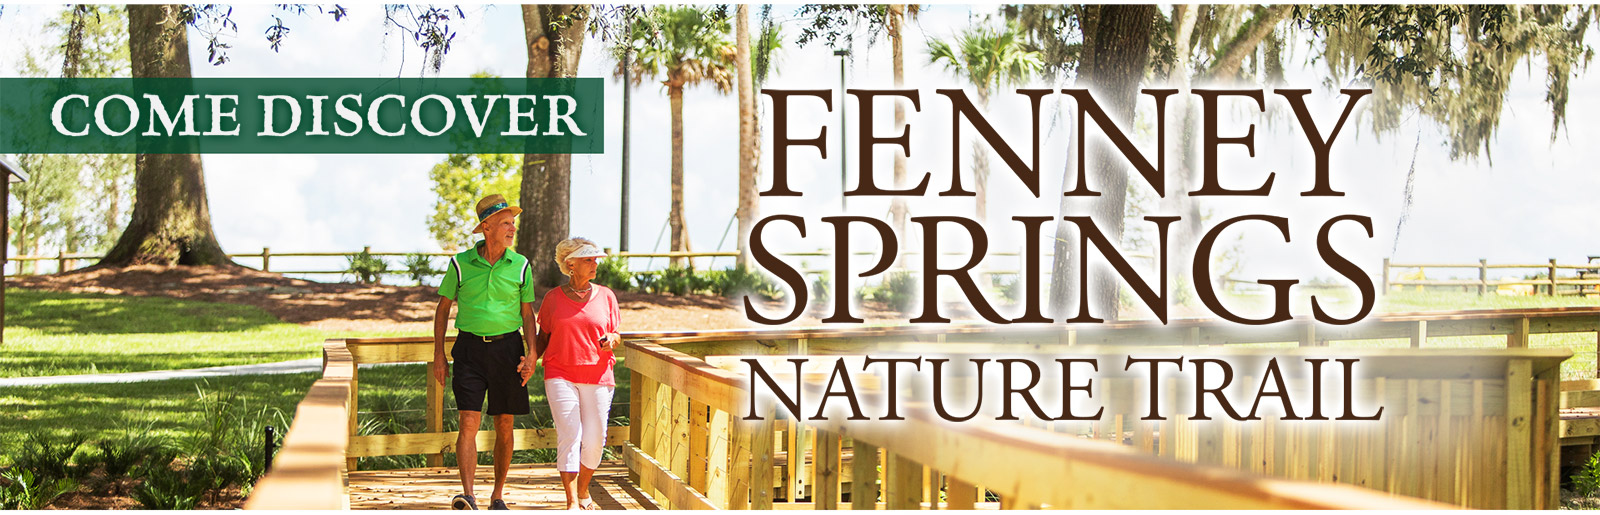 Come Discover Fenney Springs Nature Trail